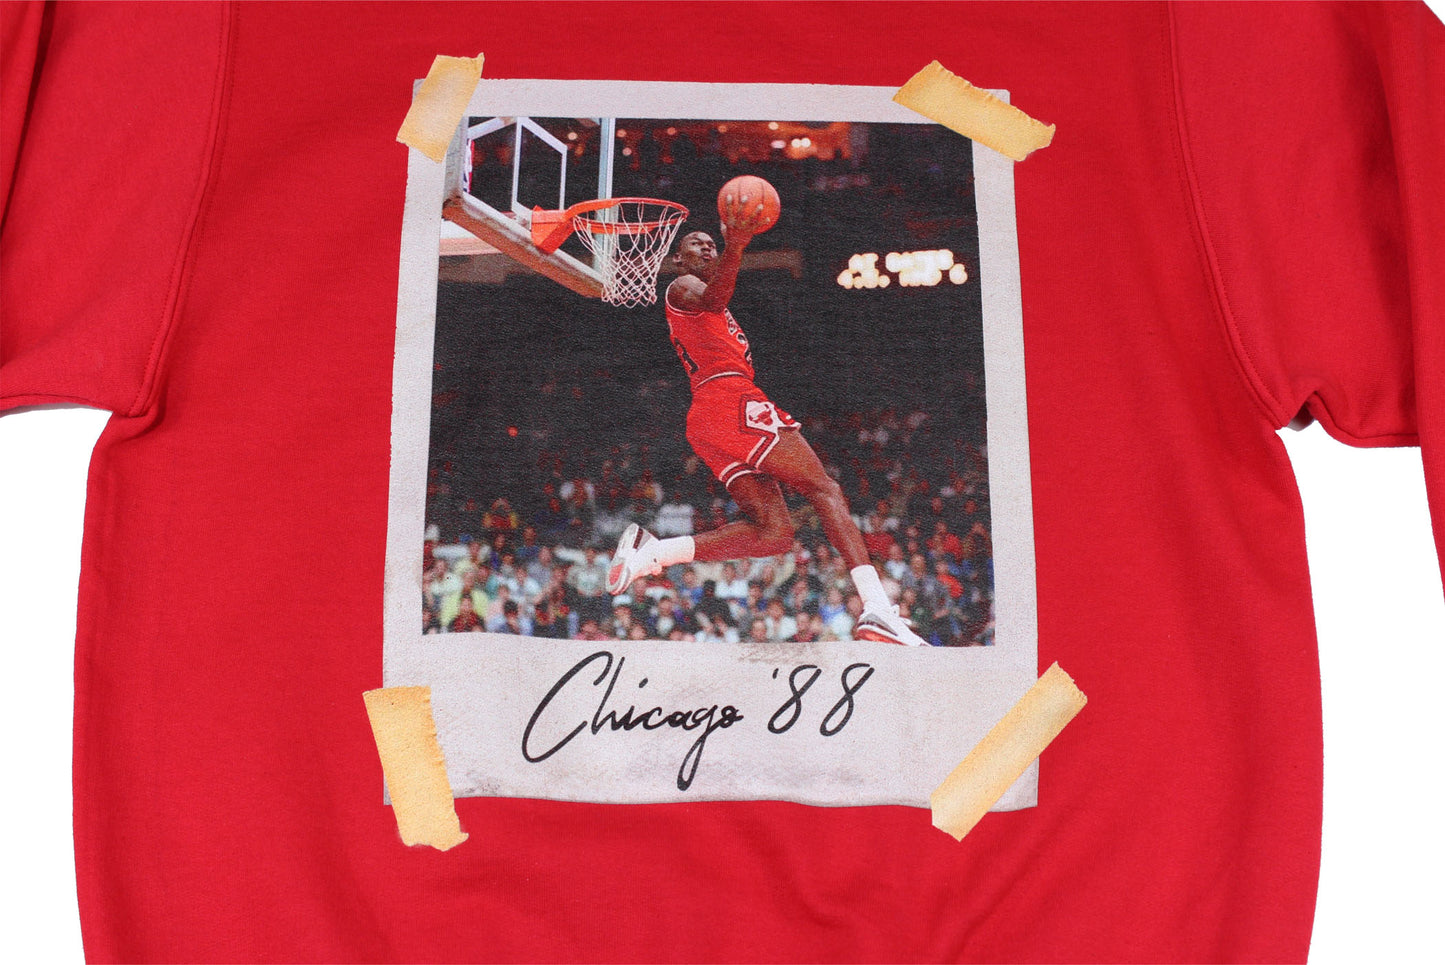 Chicago '88 Pay Homage (Red)